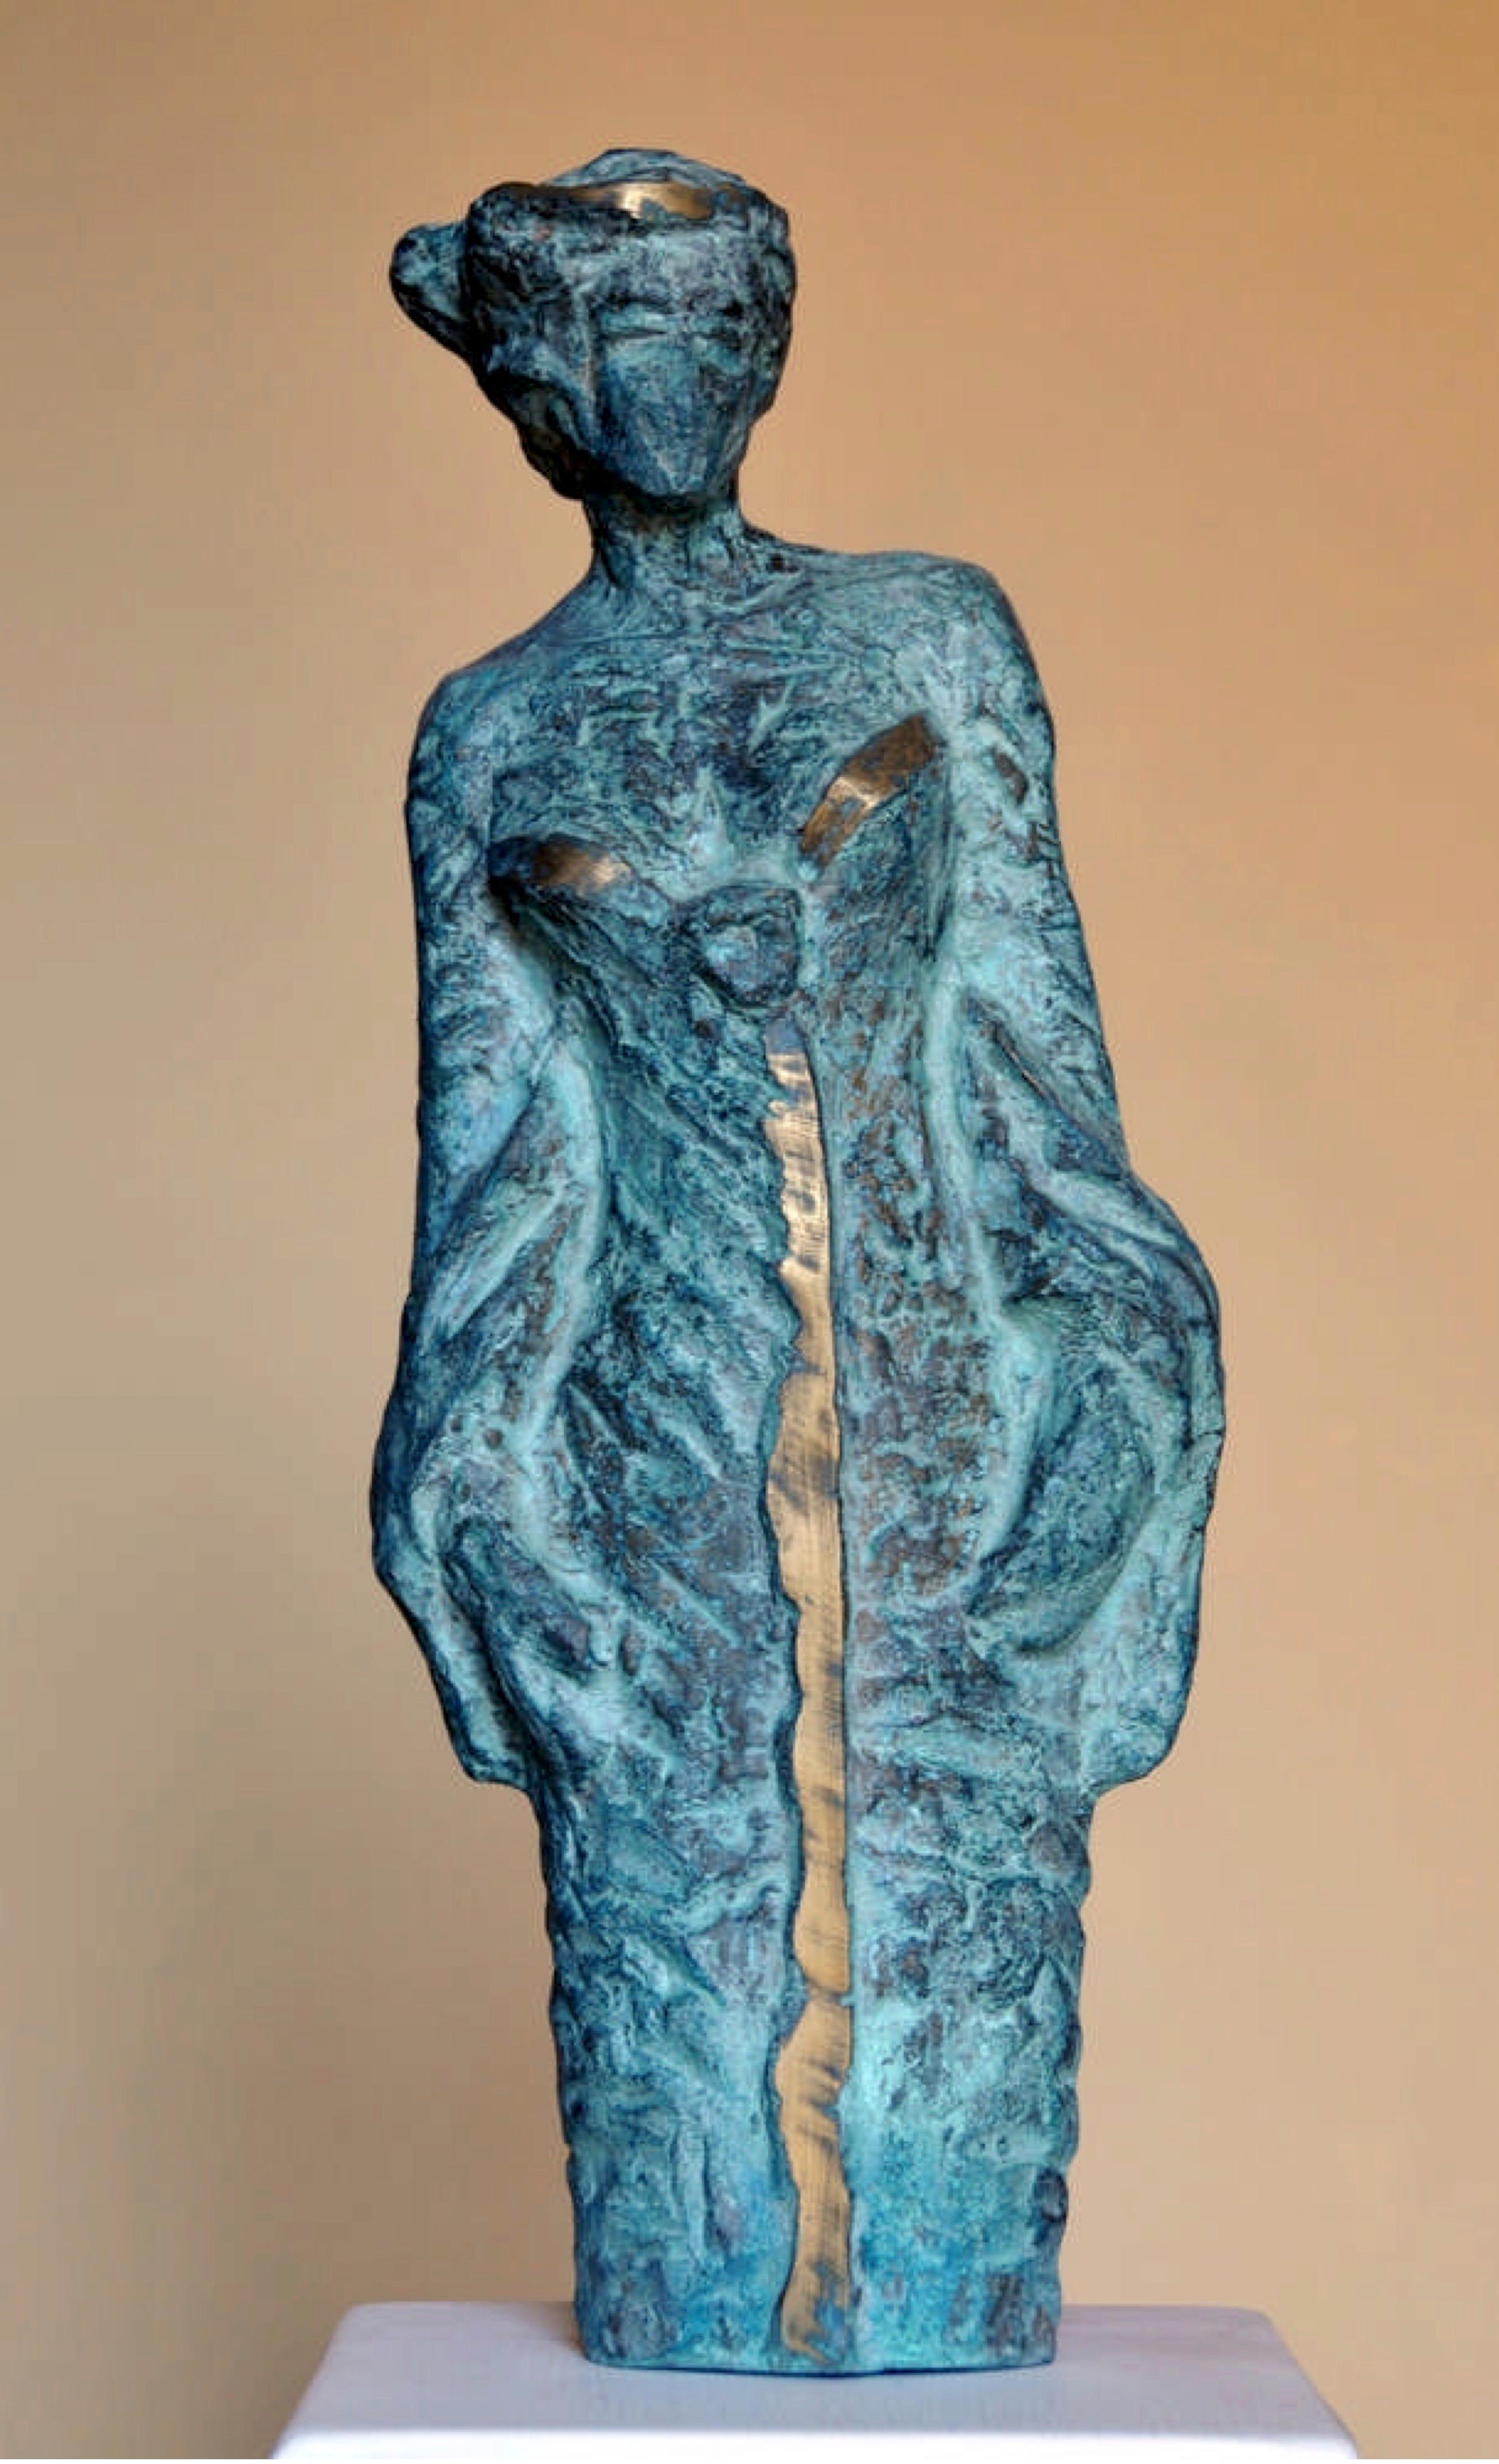 "Mannequine" Bronze Sculpture 18" x 7" x 4" inch by Sarkis Tossonian	

* Due to the Ministry of Culture policy + COVID situation, handling time (paperwork) may take up to 1-3 month.  

Sarkis Tossoonian was born in Alexandria in 1953. He graduated